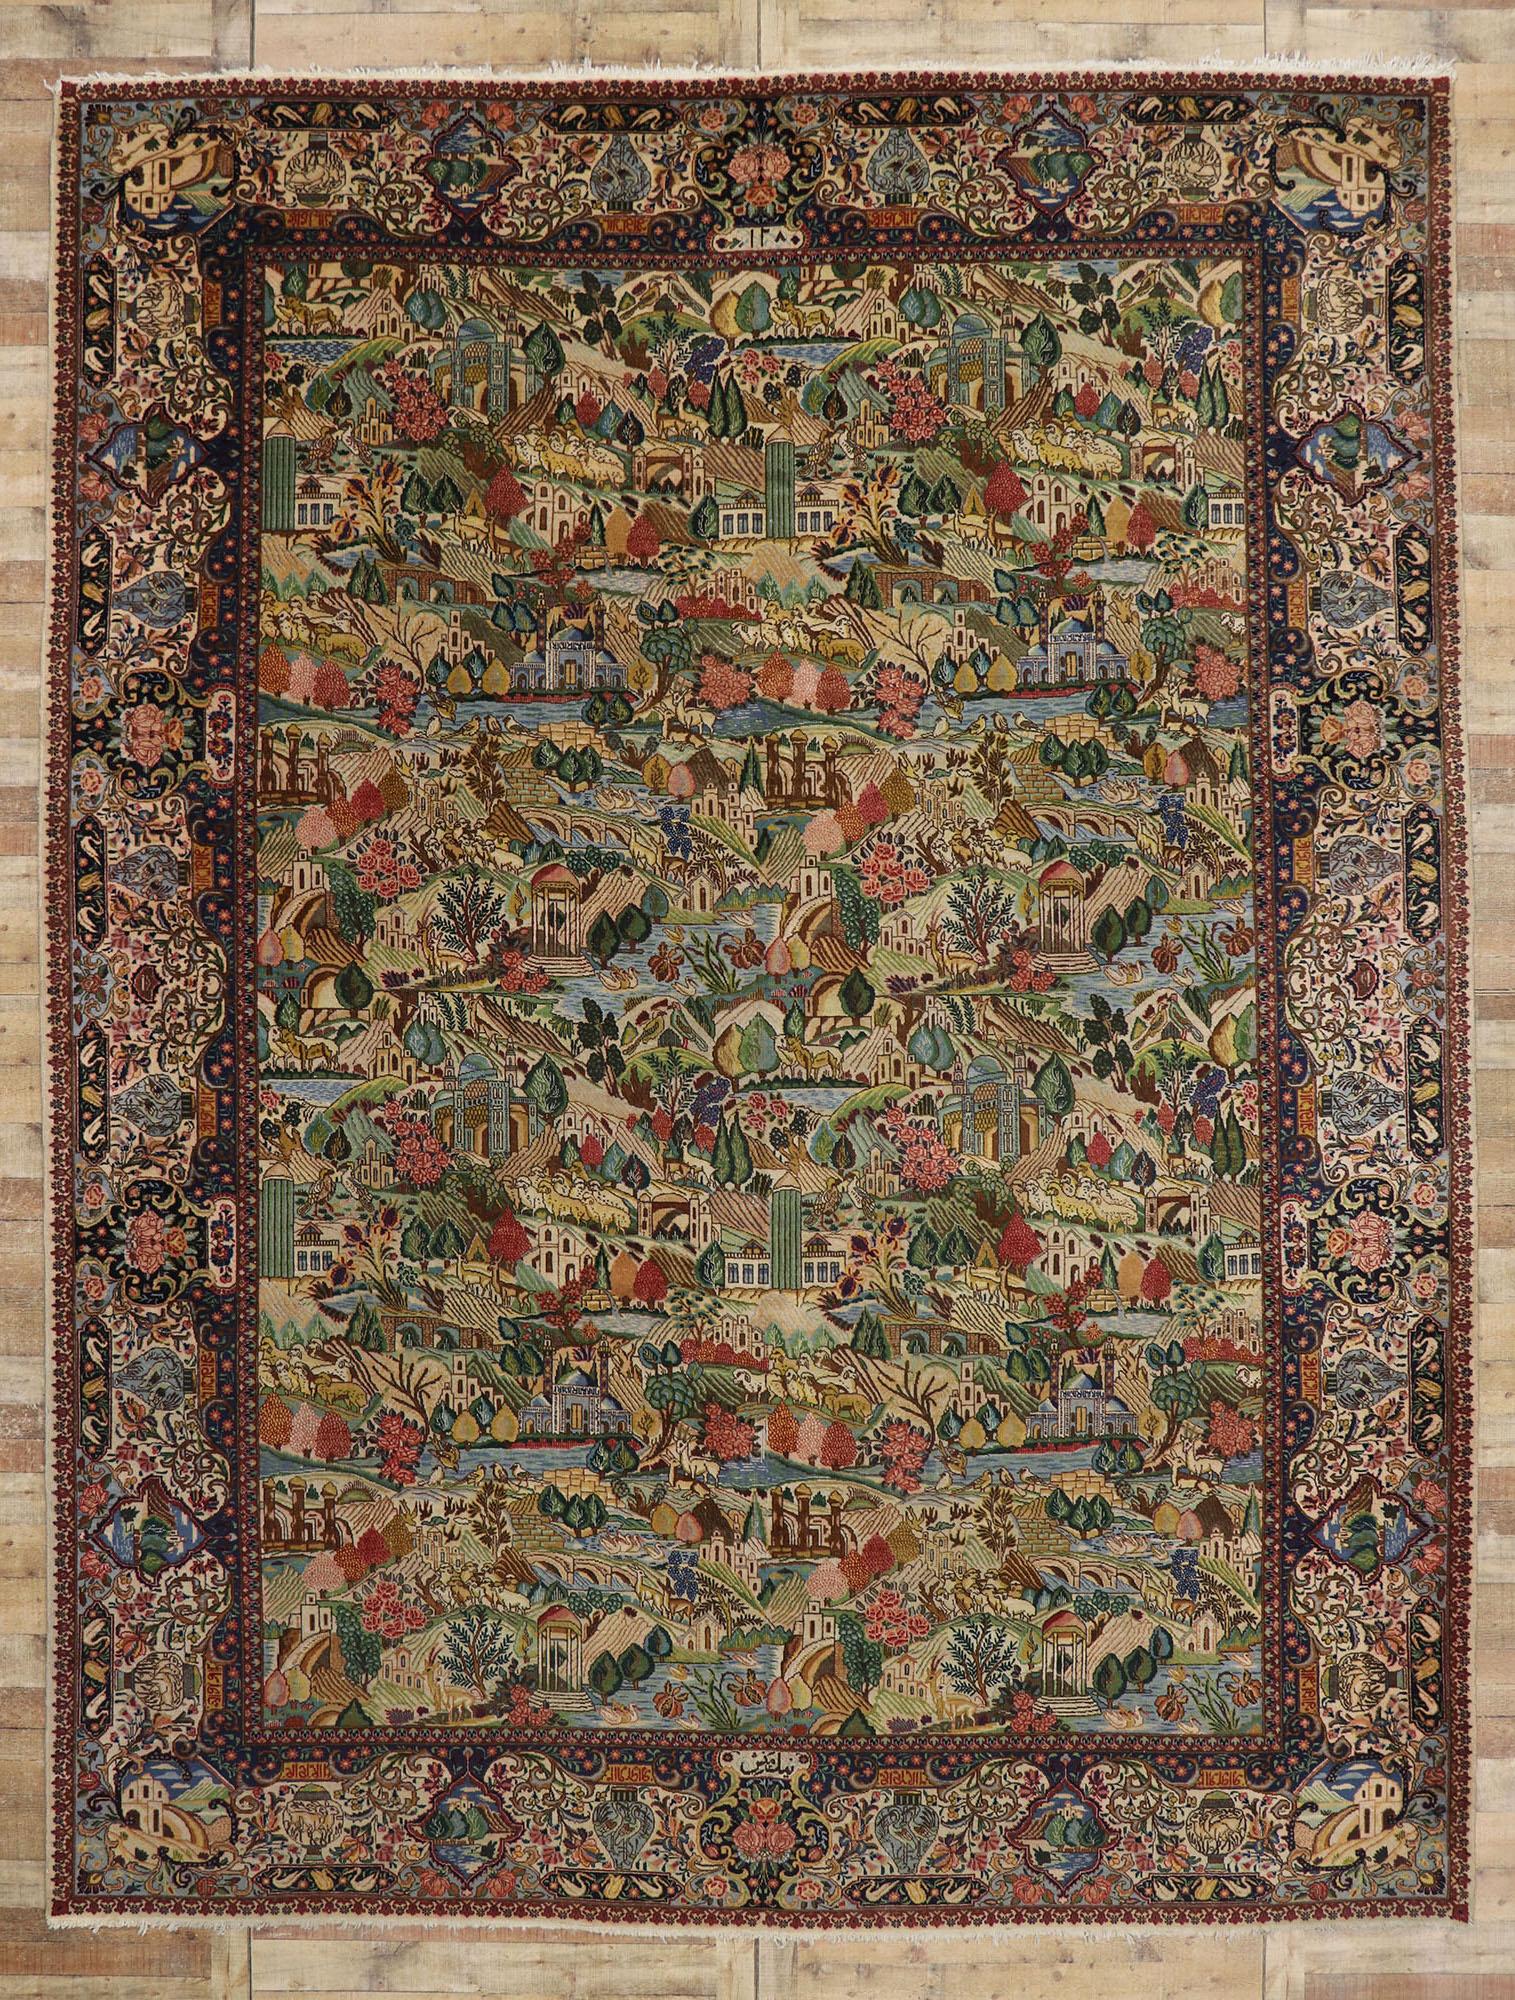 Antique Persian Tabriz Village Pictorial Rug with Signature For Sale 2